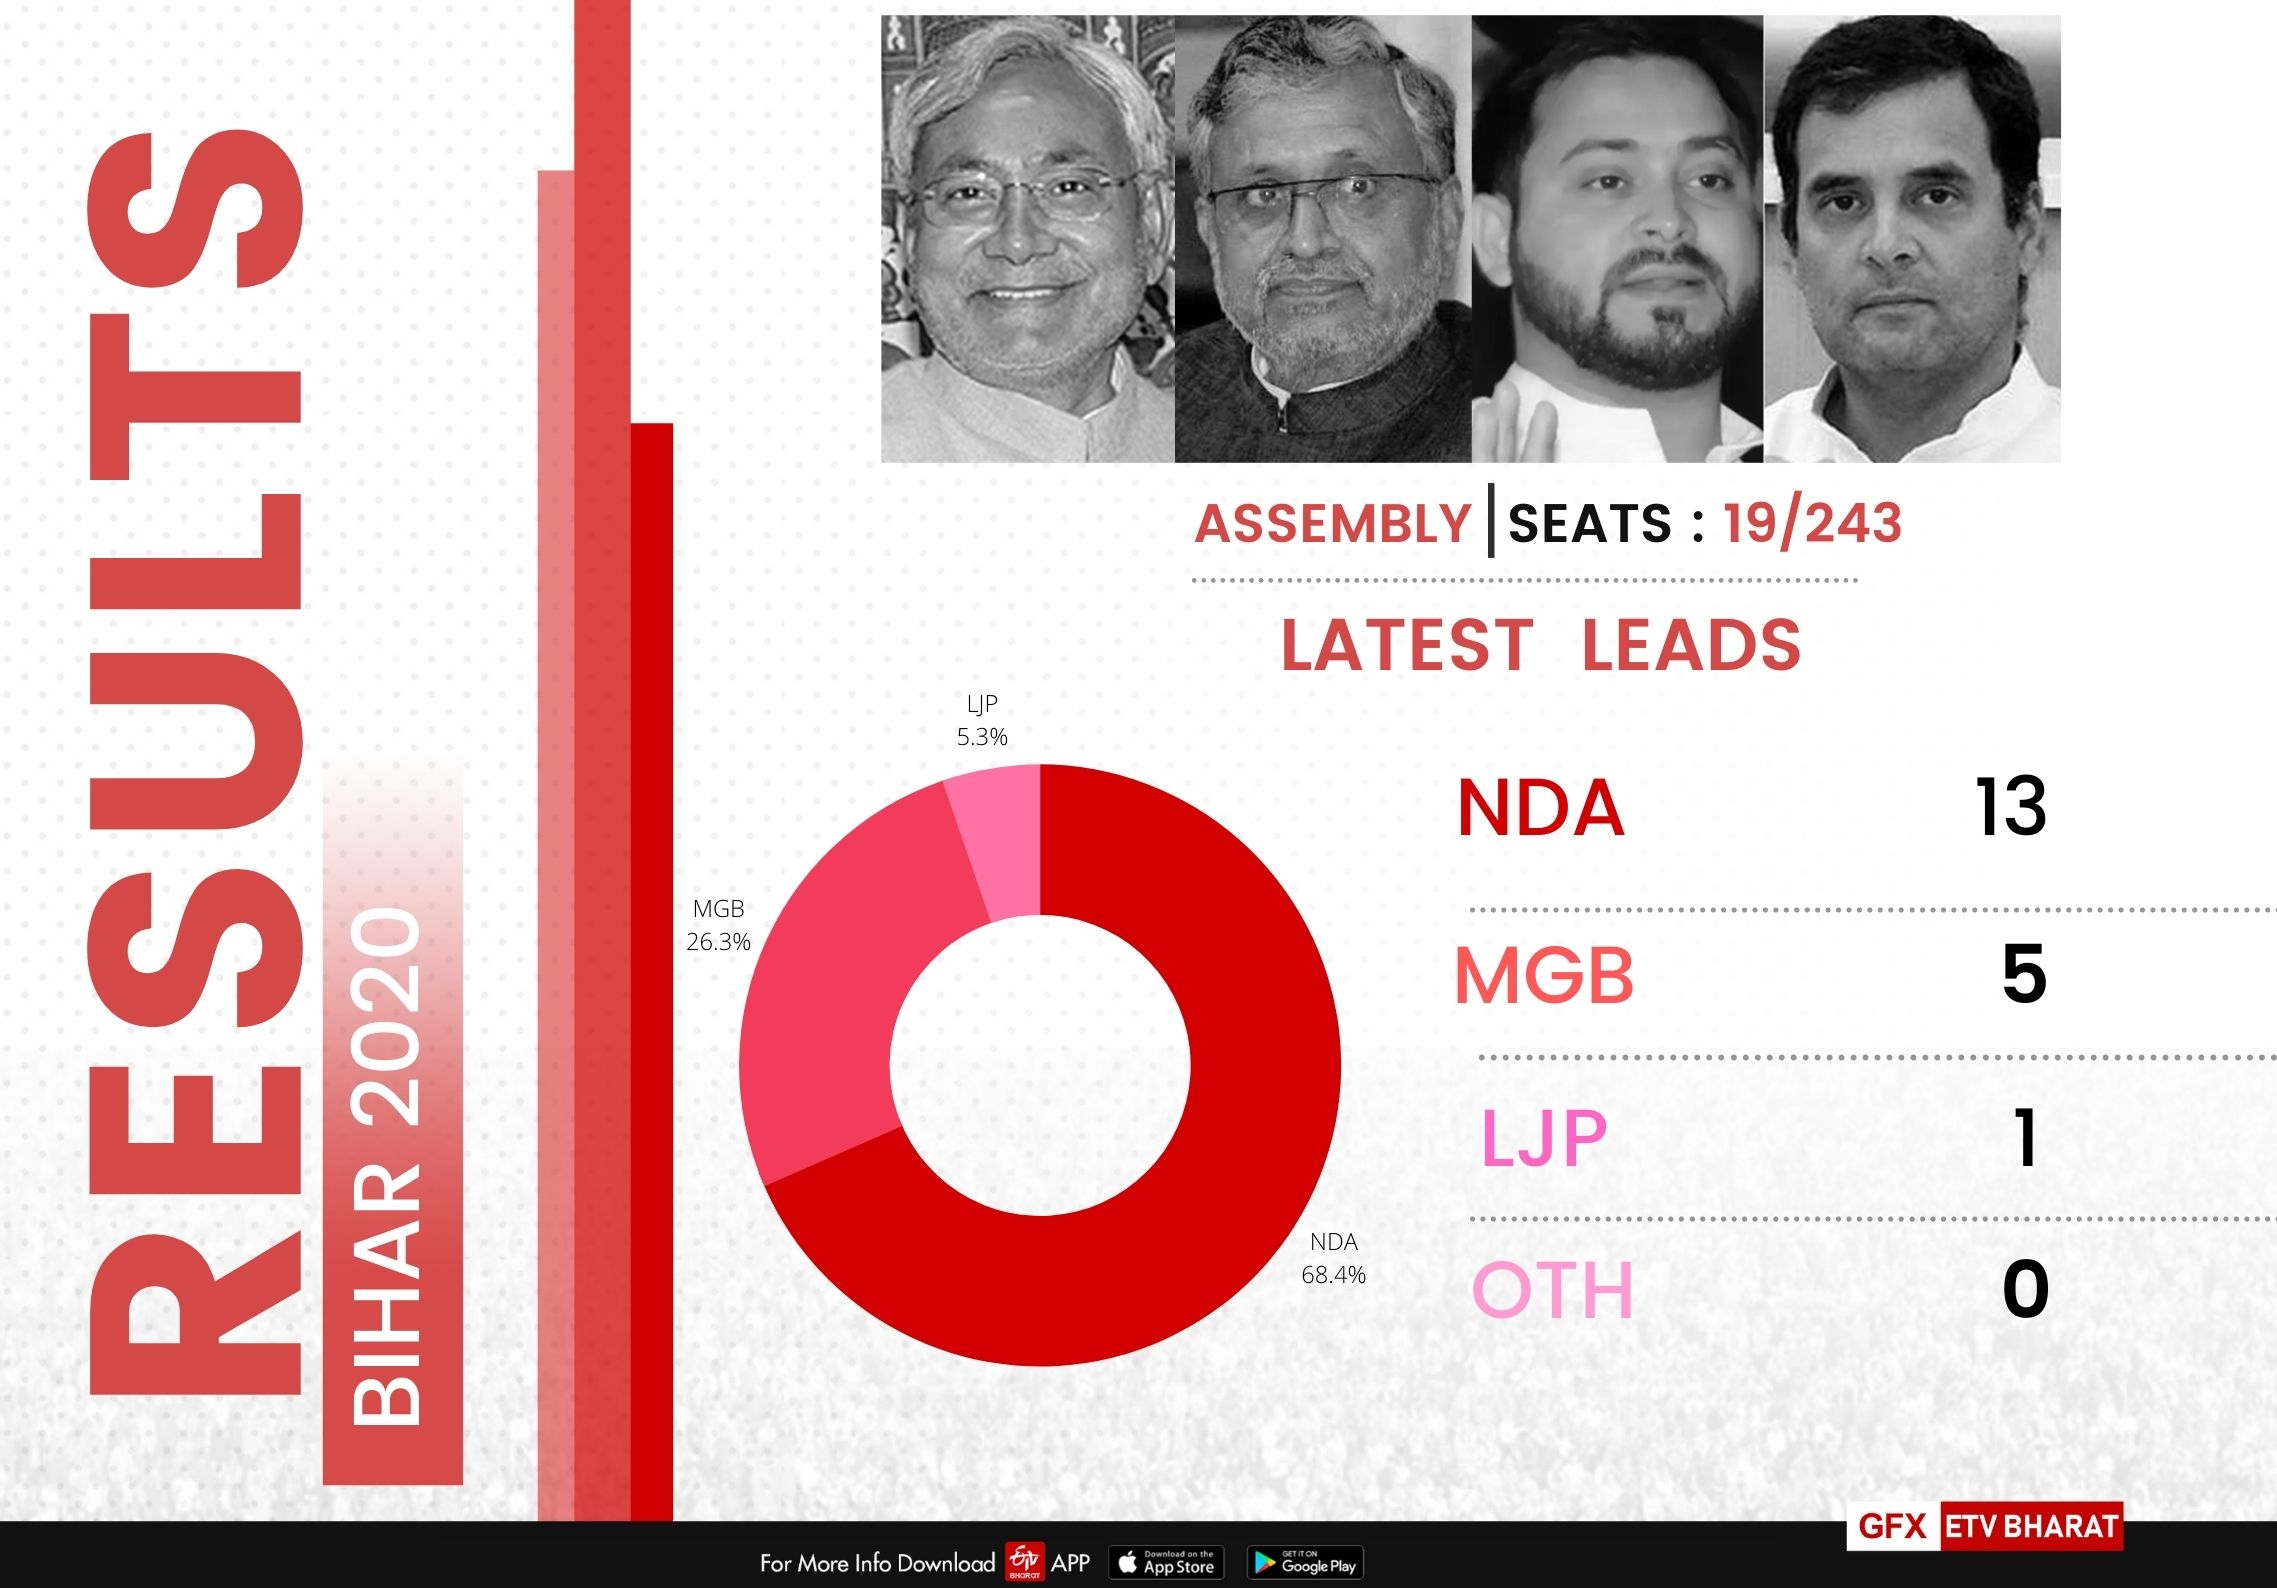 Leads as of 8.30 am